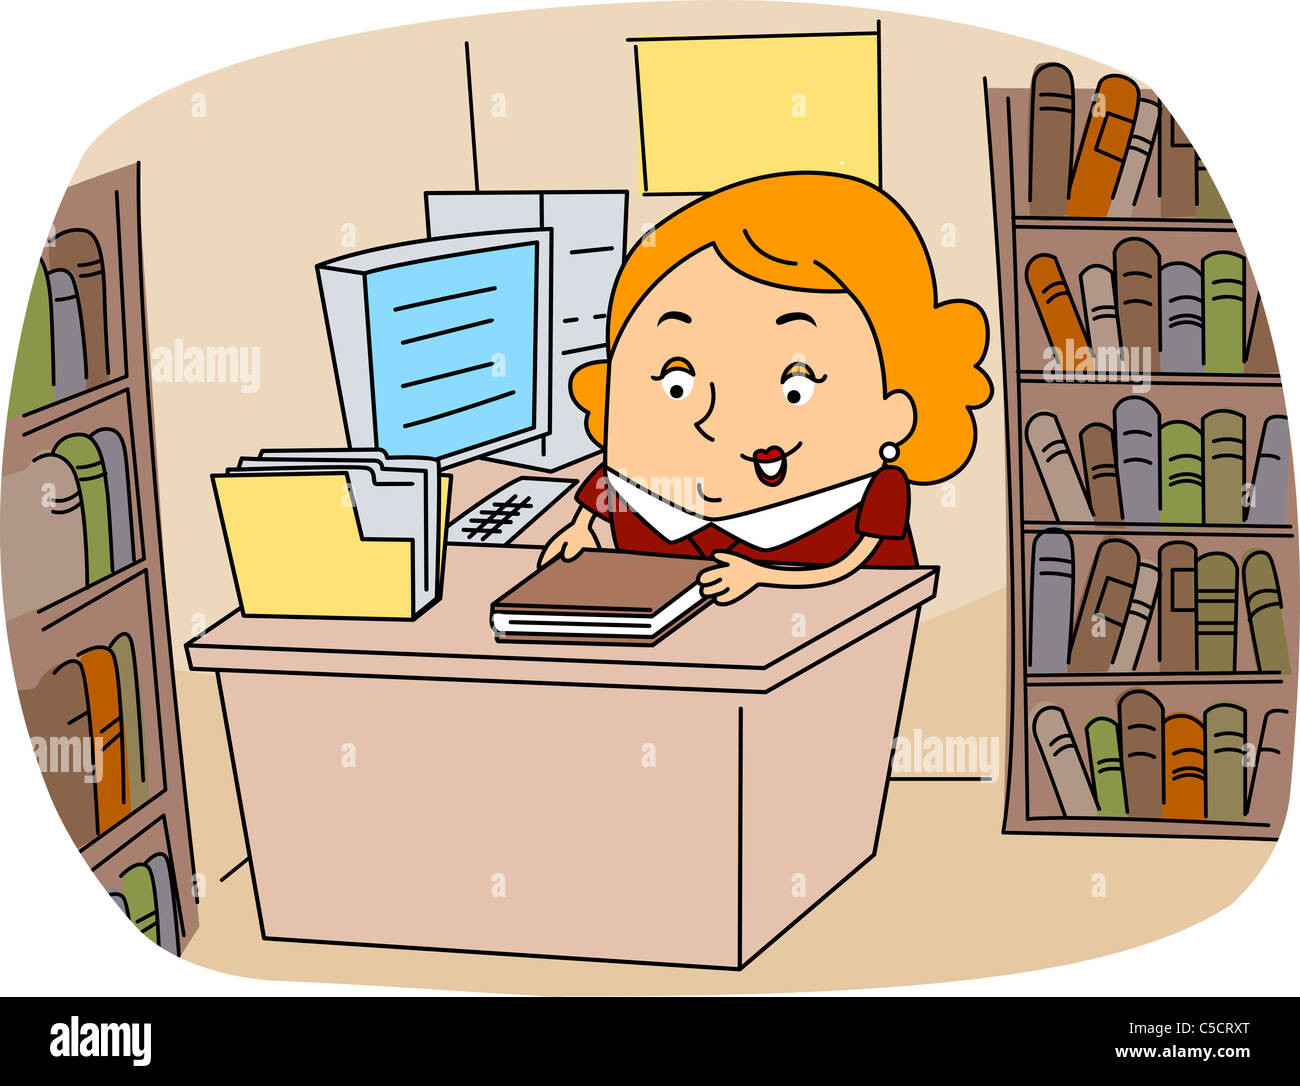 Illustration of a Librarian at Work Stock Photo